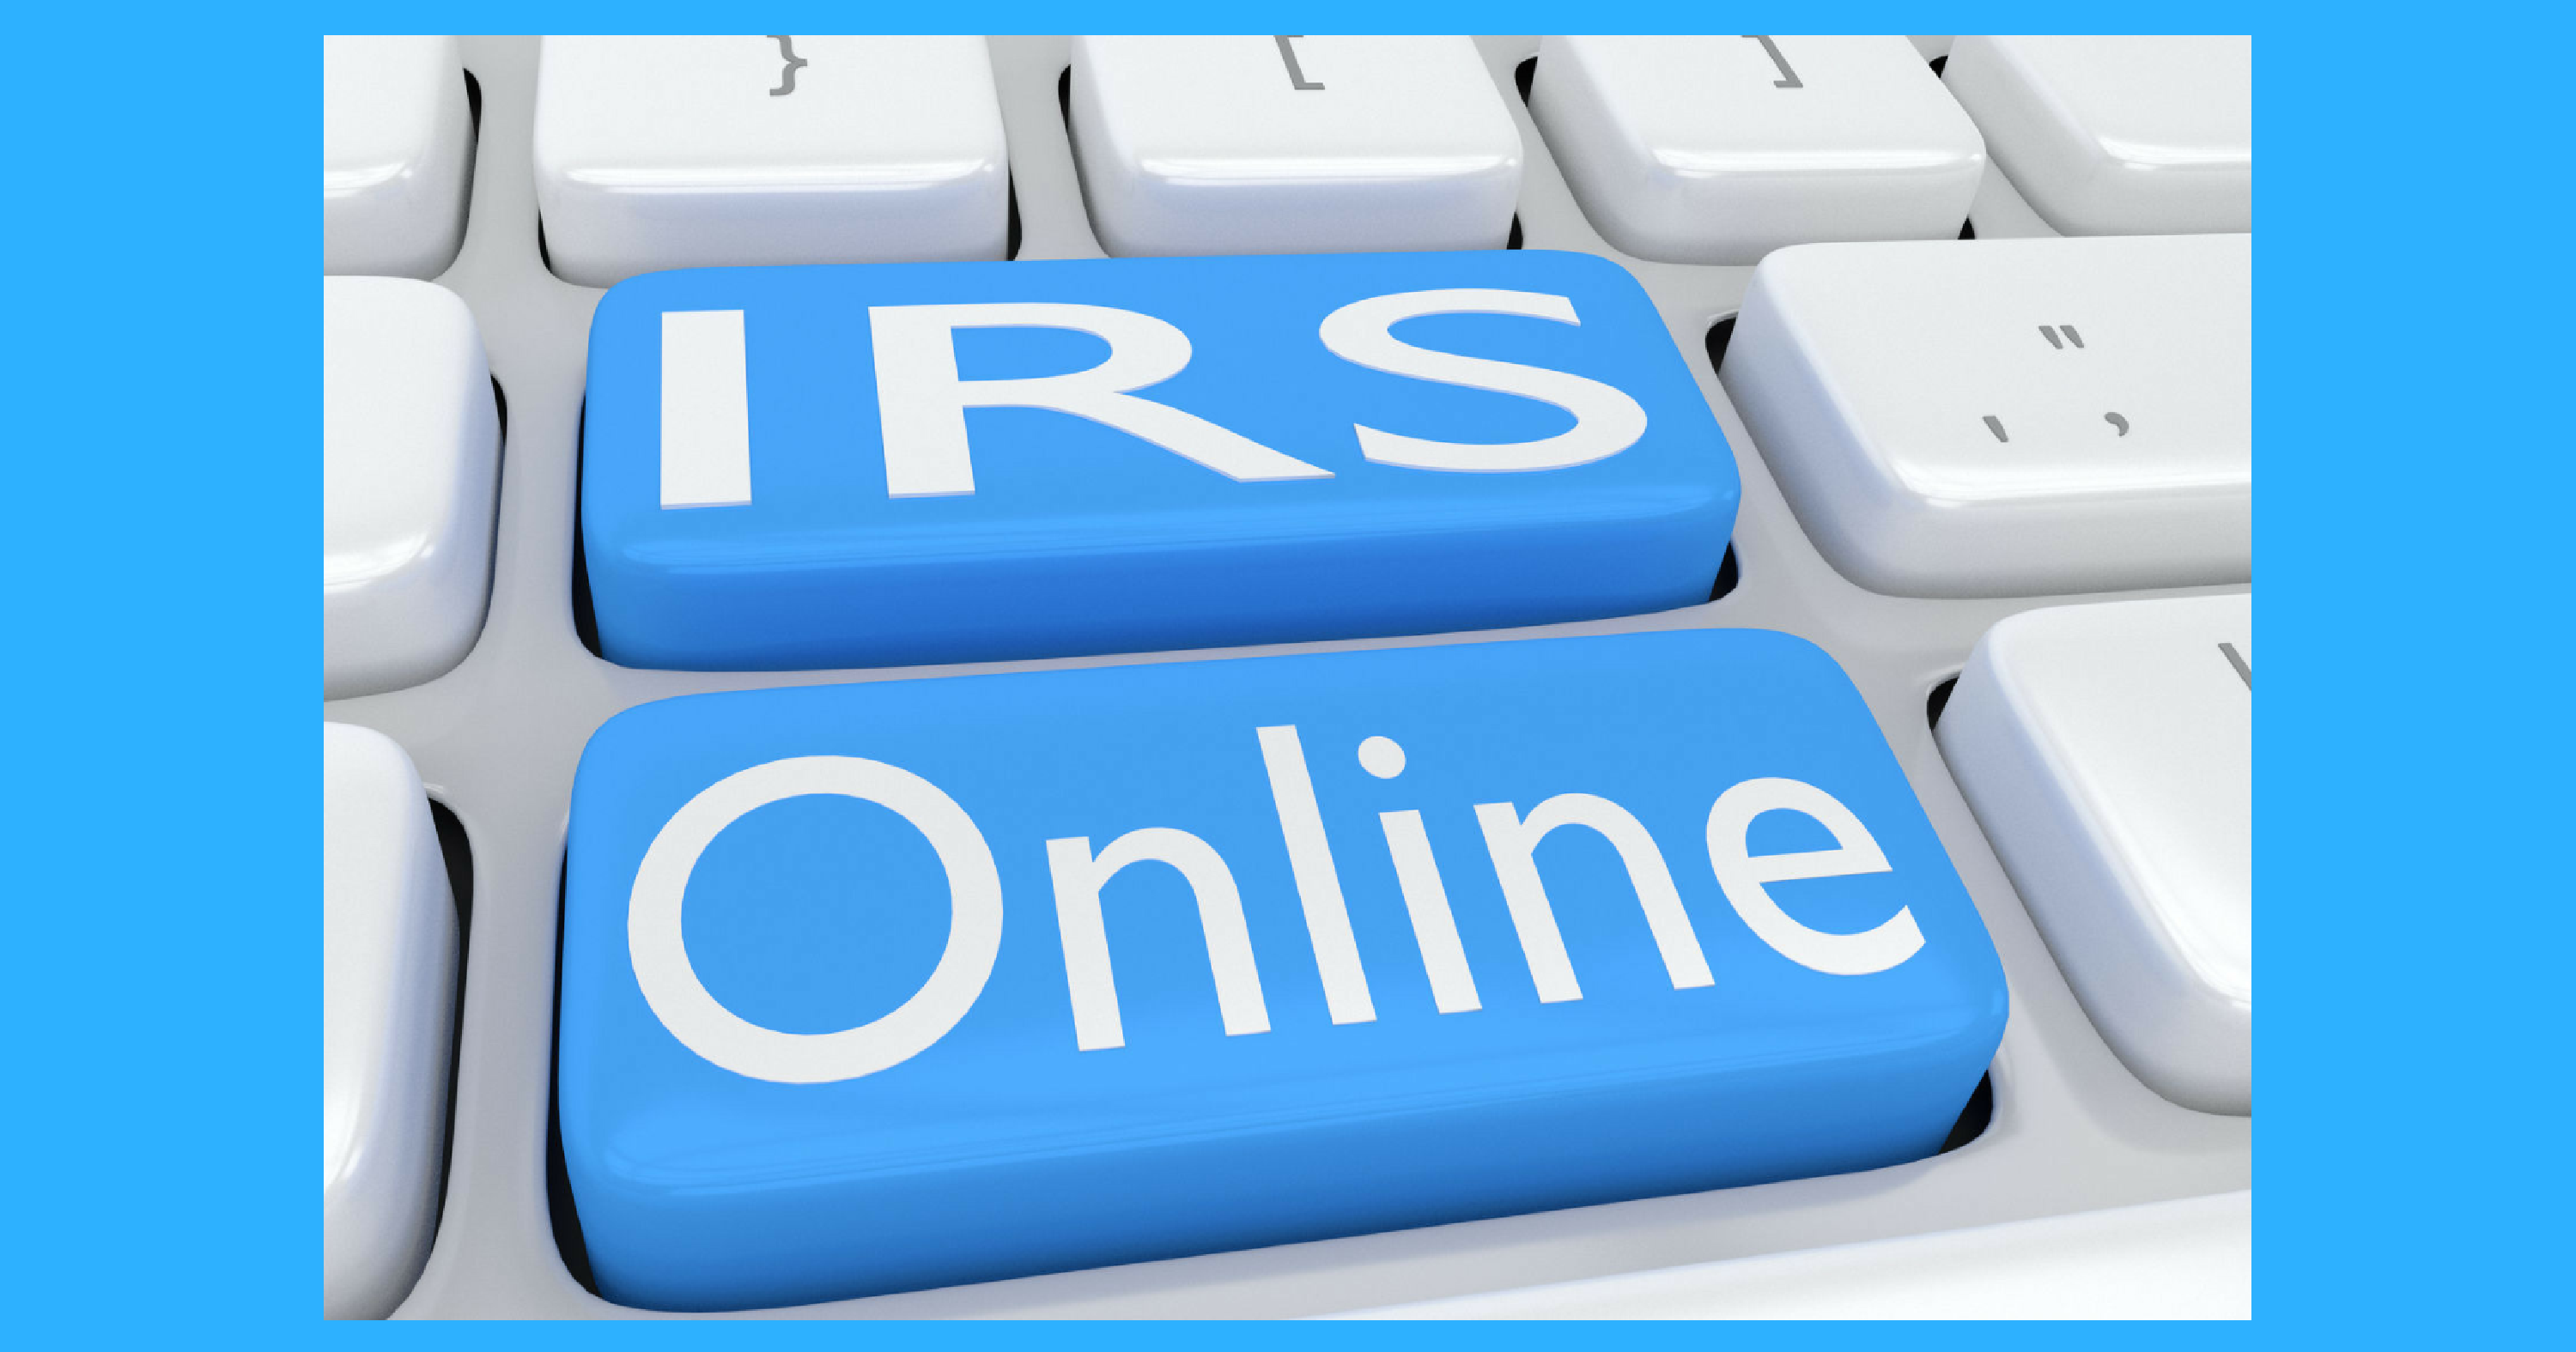 Check Out the Helpful and FREE Online Tools on IRS.gov